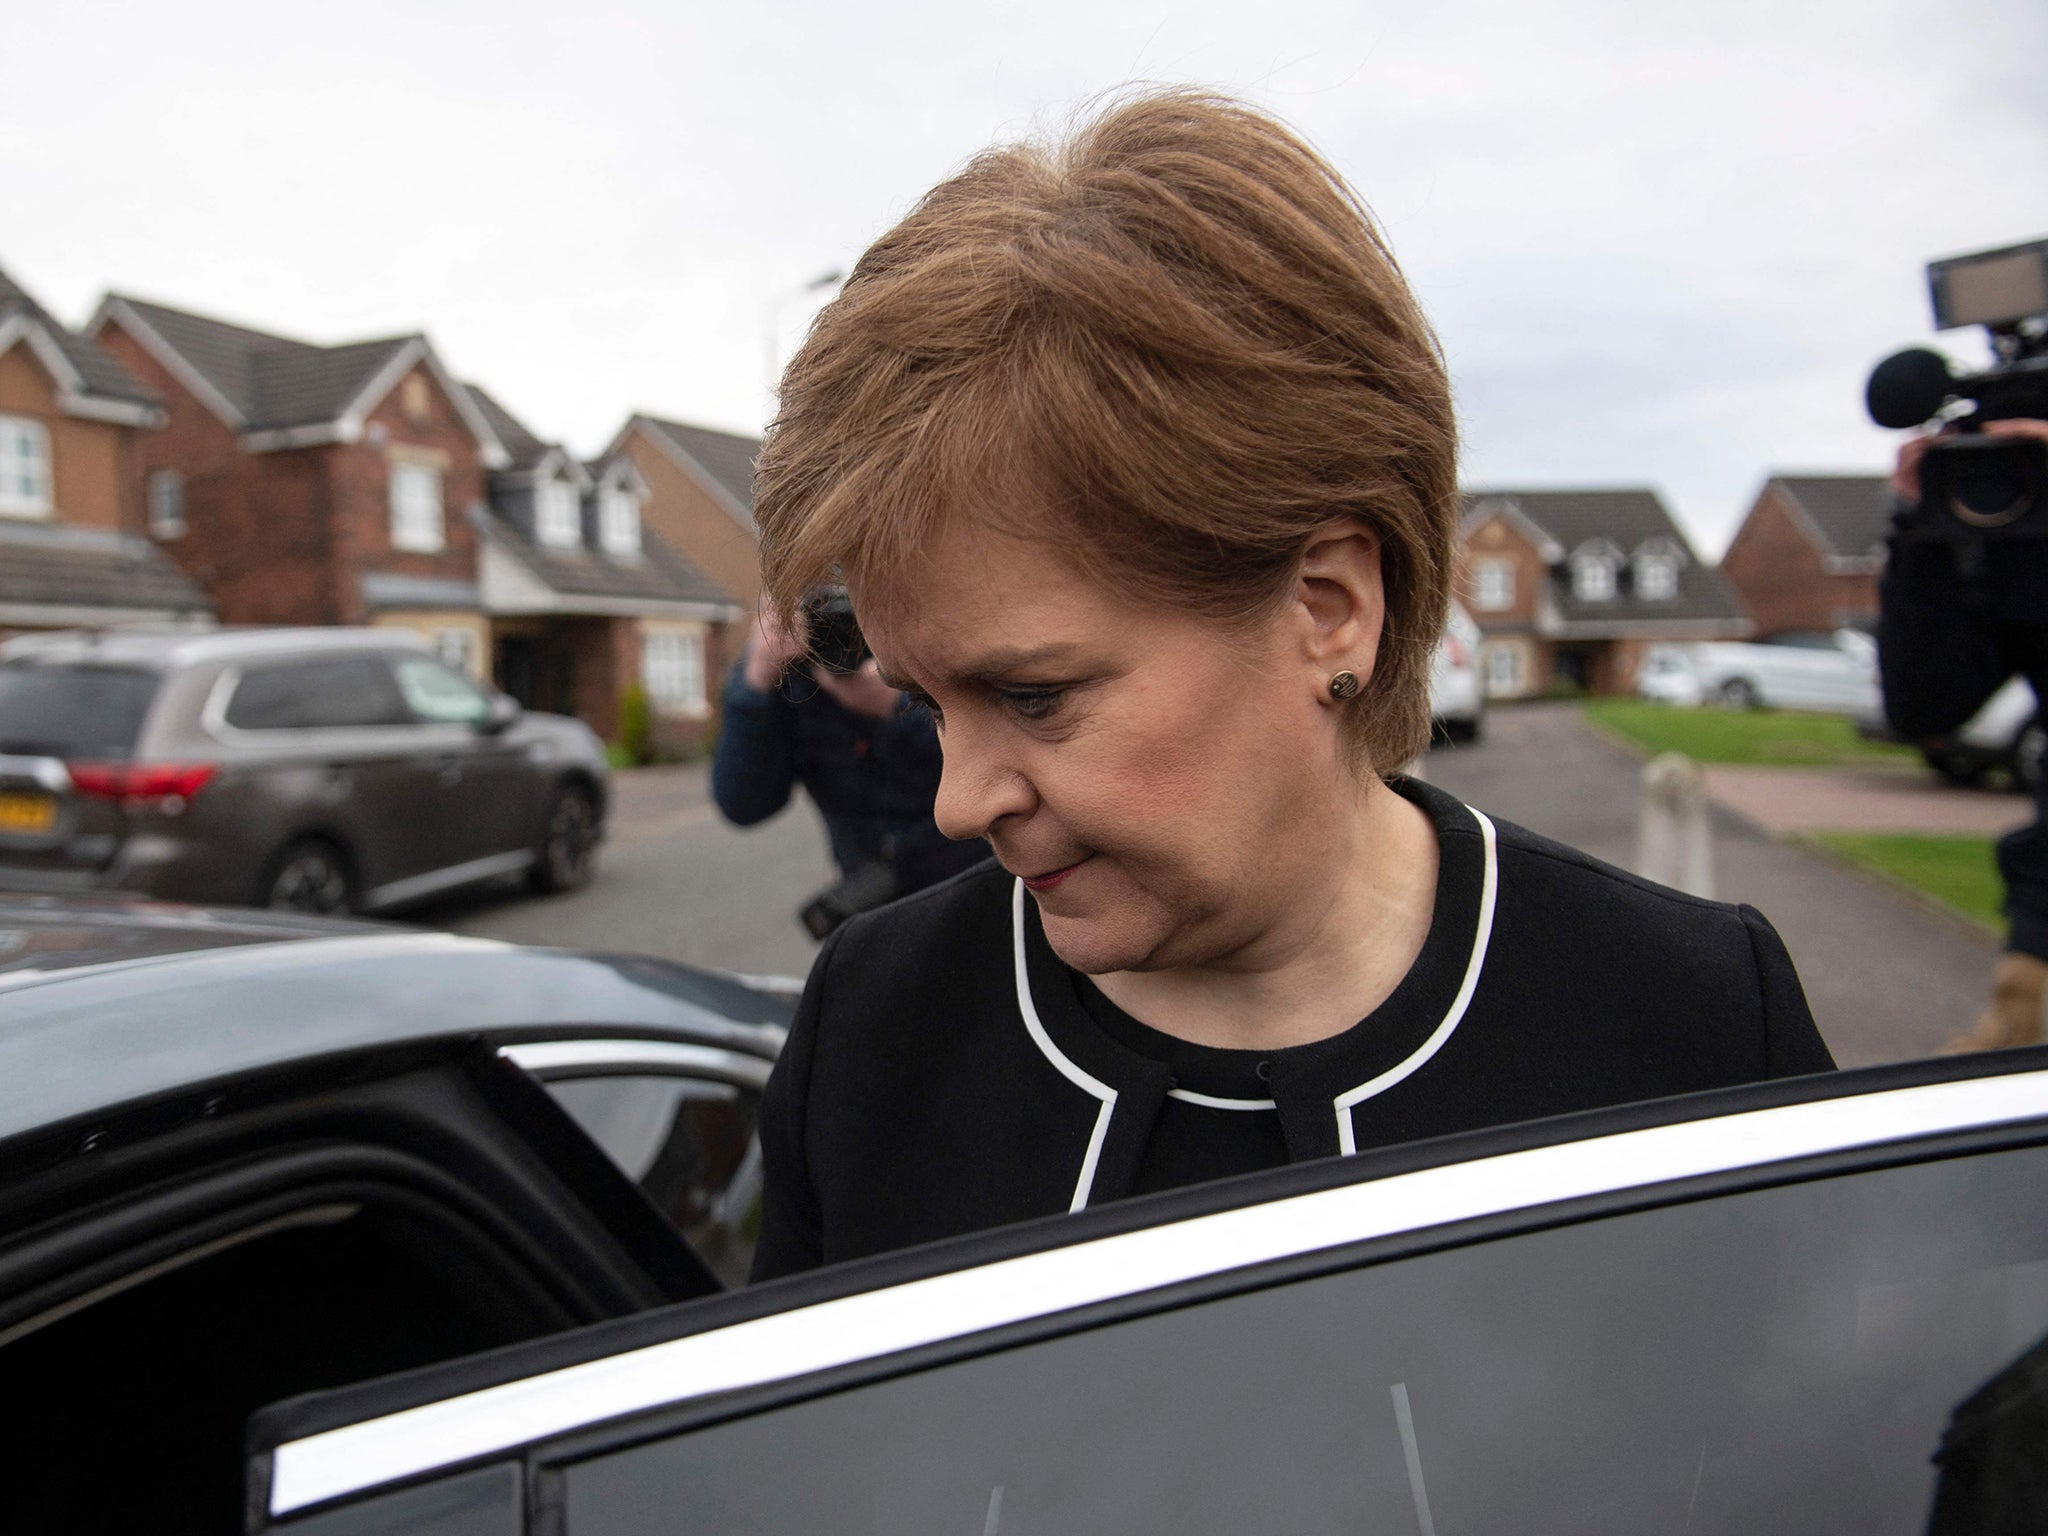 Nicola Sturgeon’s feud with Alex Salmond has drawn attention to the different electoral systems in the UK